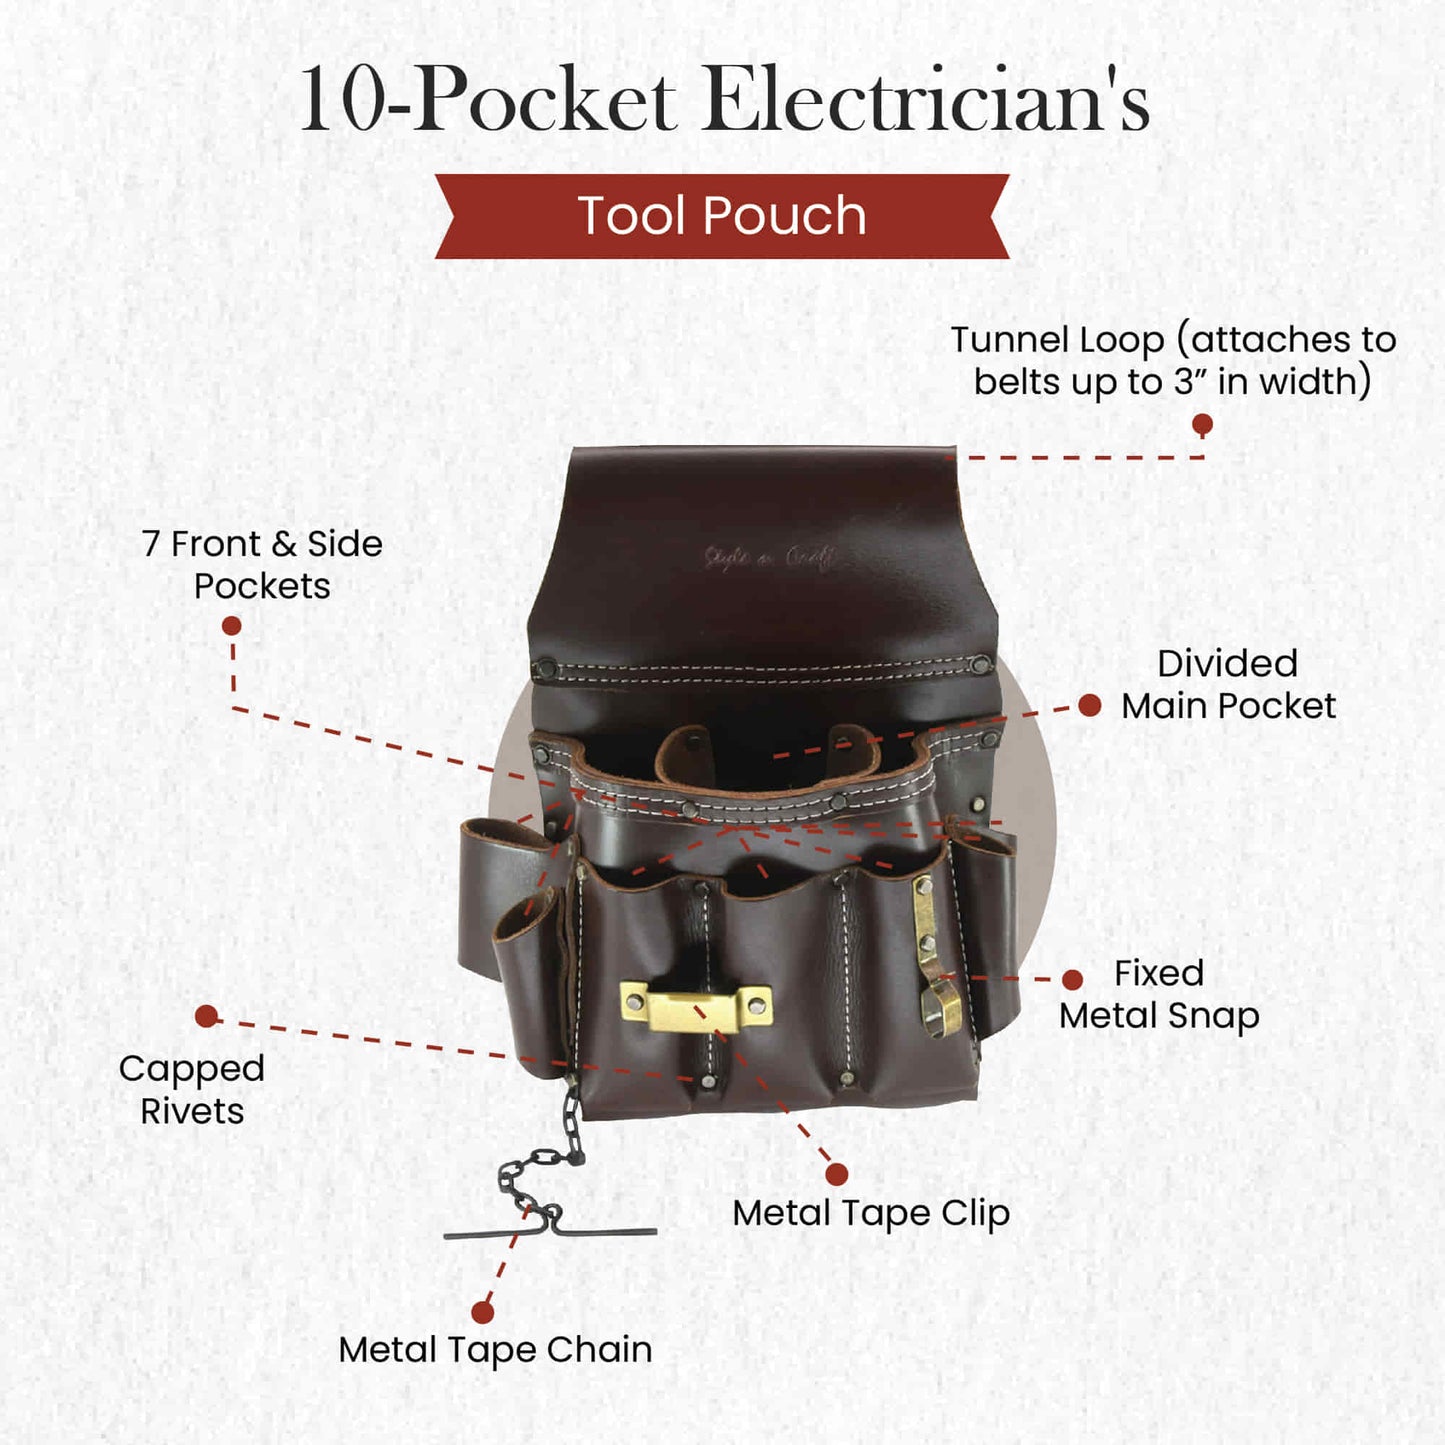 Style n Craft 98465 - 10 Pocket Electrician's Tool Pouch in Dark Tan Top Grain Leather with Metal Tape Clip, Metal Snap & Metal Tape Chain - Front View Showing the Details